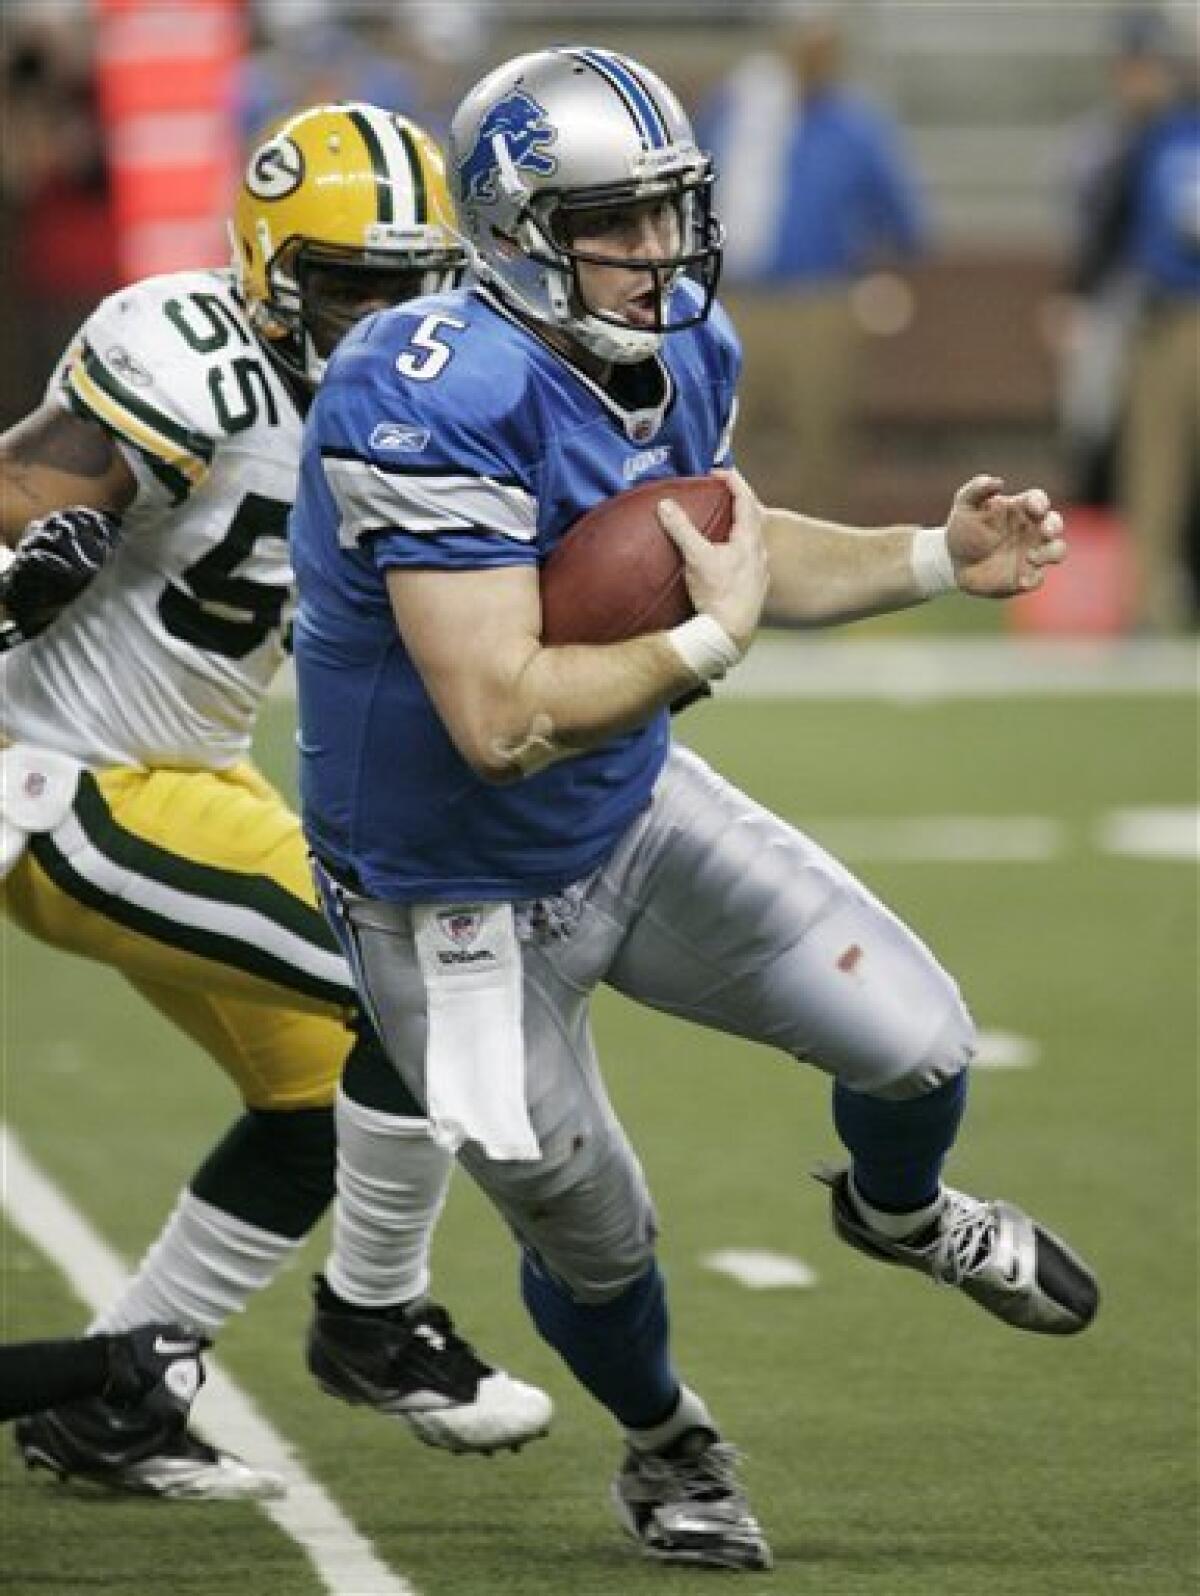 Rodgers hurt, Lions beat Packers 7-3 to snap skids - The San Diego  Union-Tribune